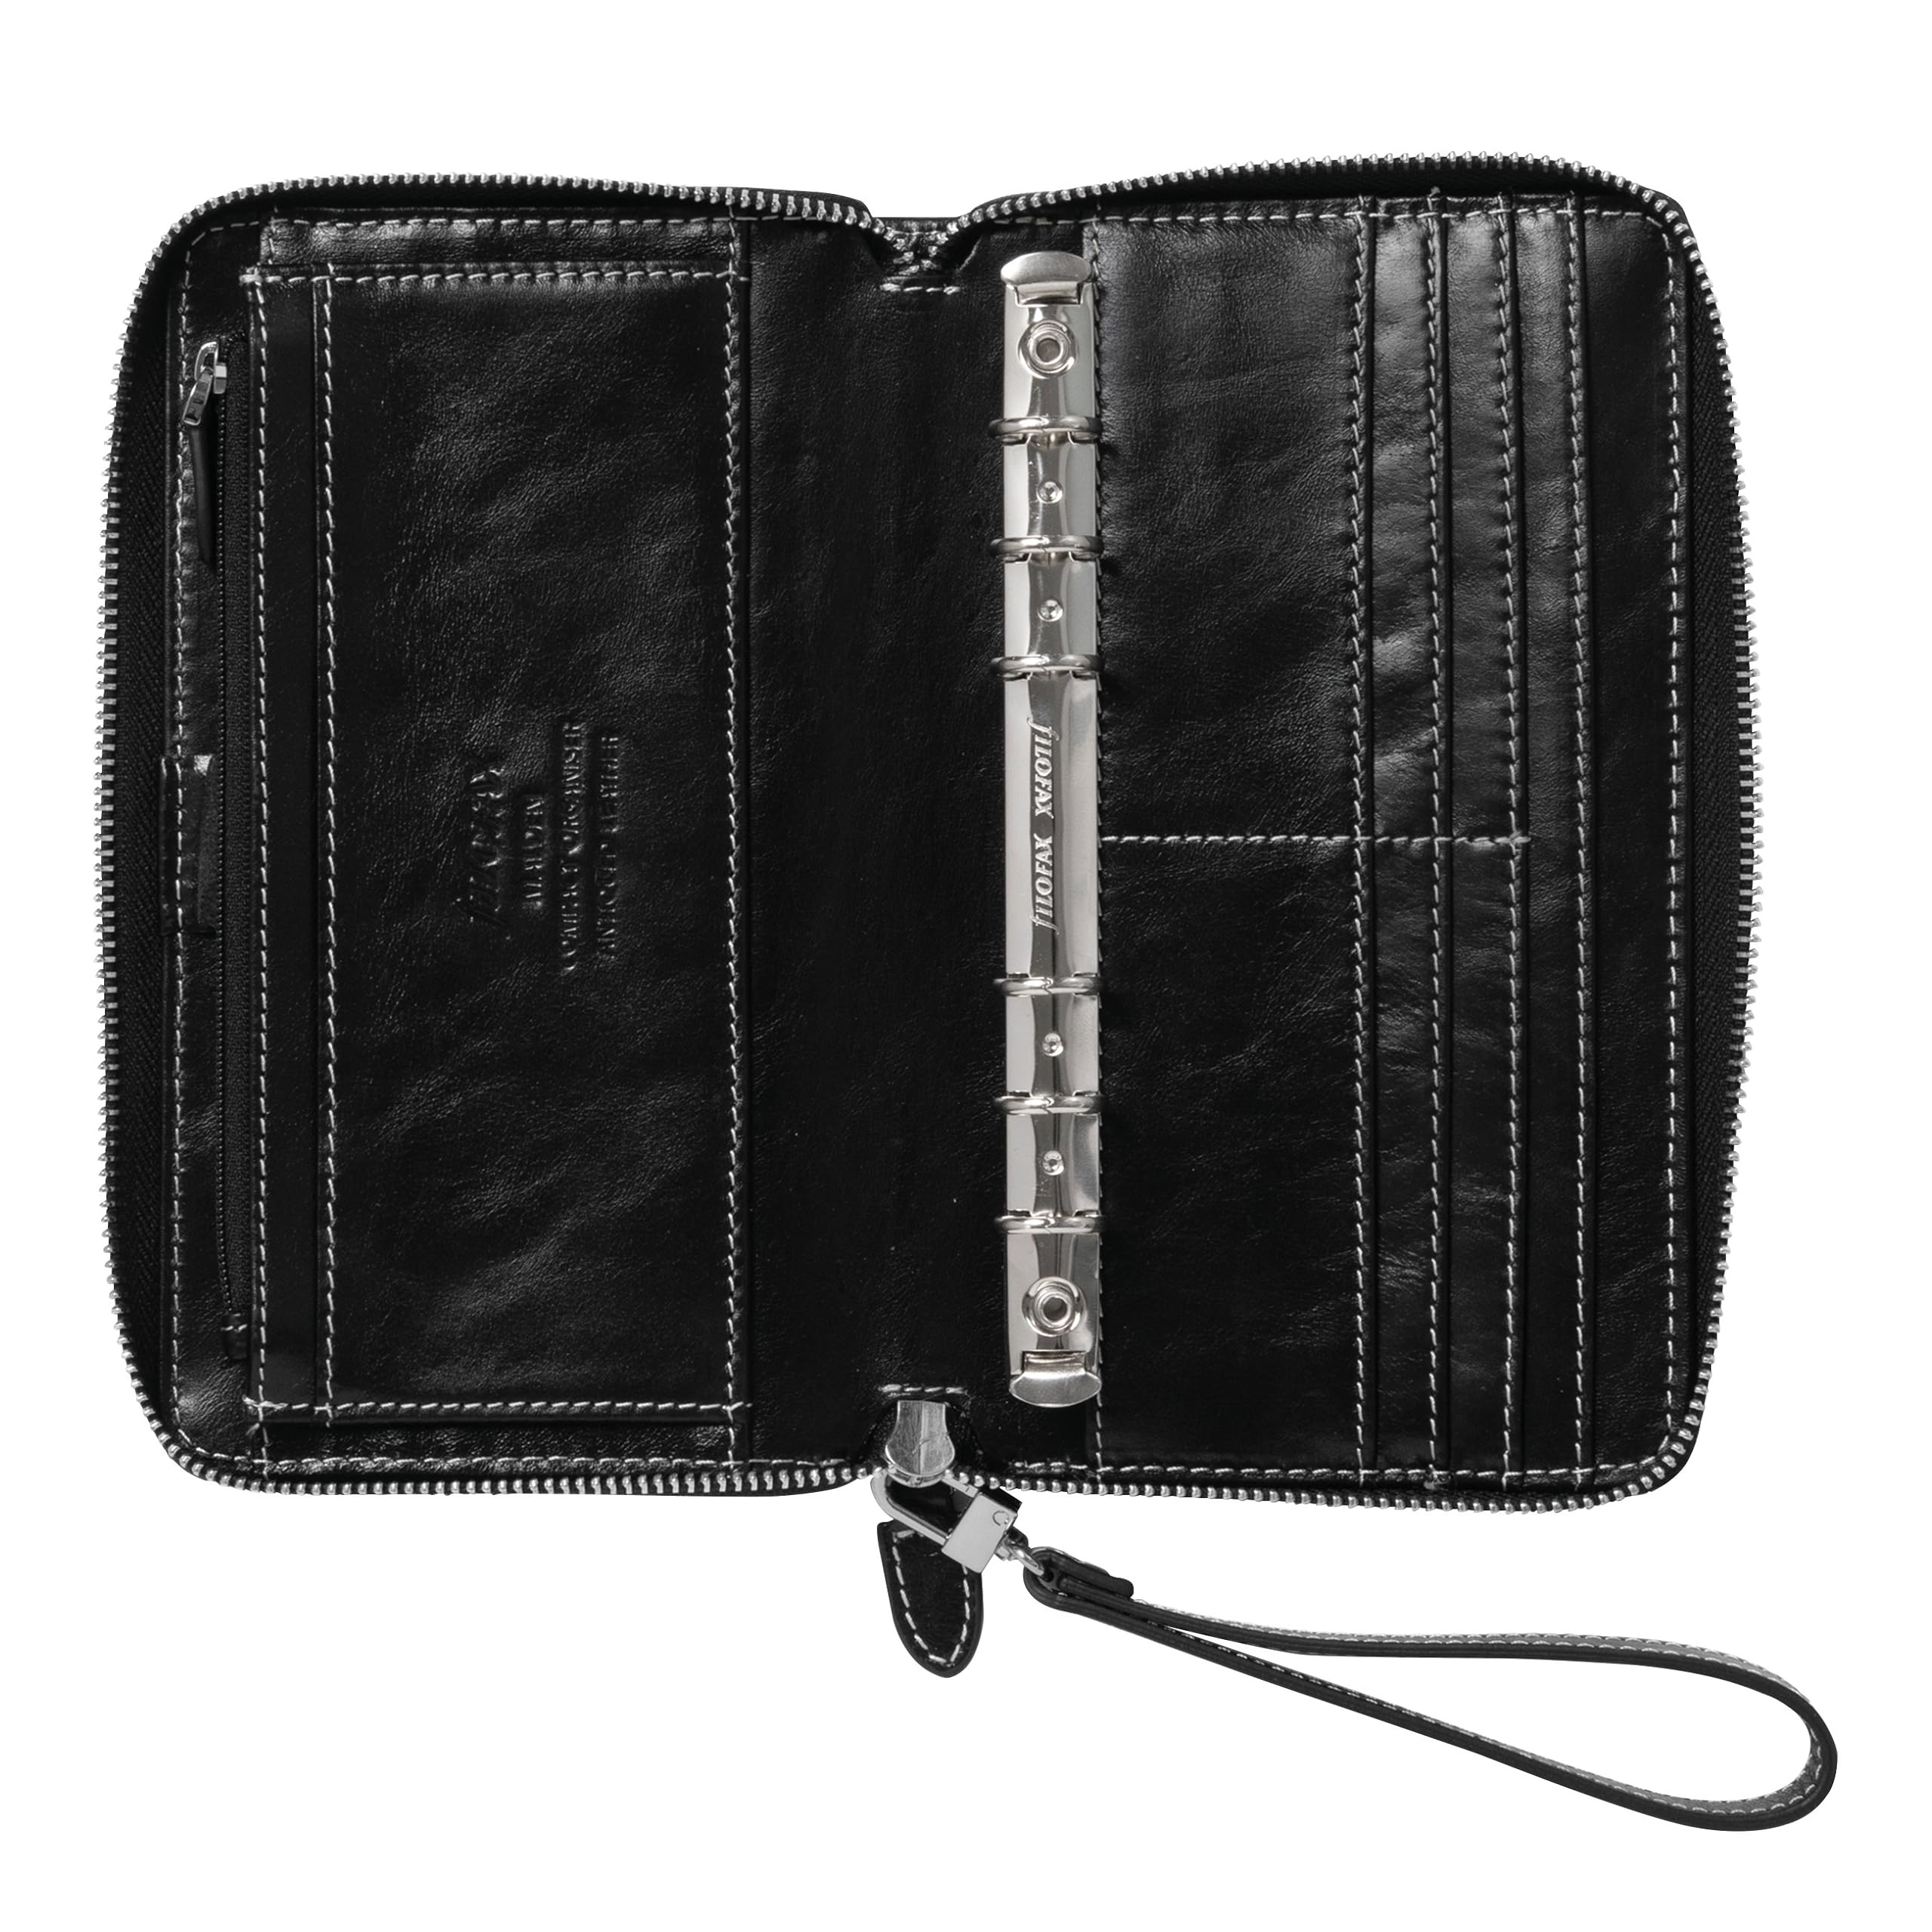 Filofax Malden Zip Organizer, Personal Compact Size, Black - Tactile, Full-Grain Buffalo Leather, Six Rings, with Cotton Cream Week-to-View Calendar Diary, Multilingual, 2024 (C022630-24)